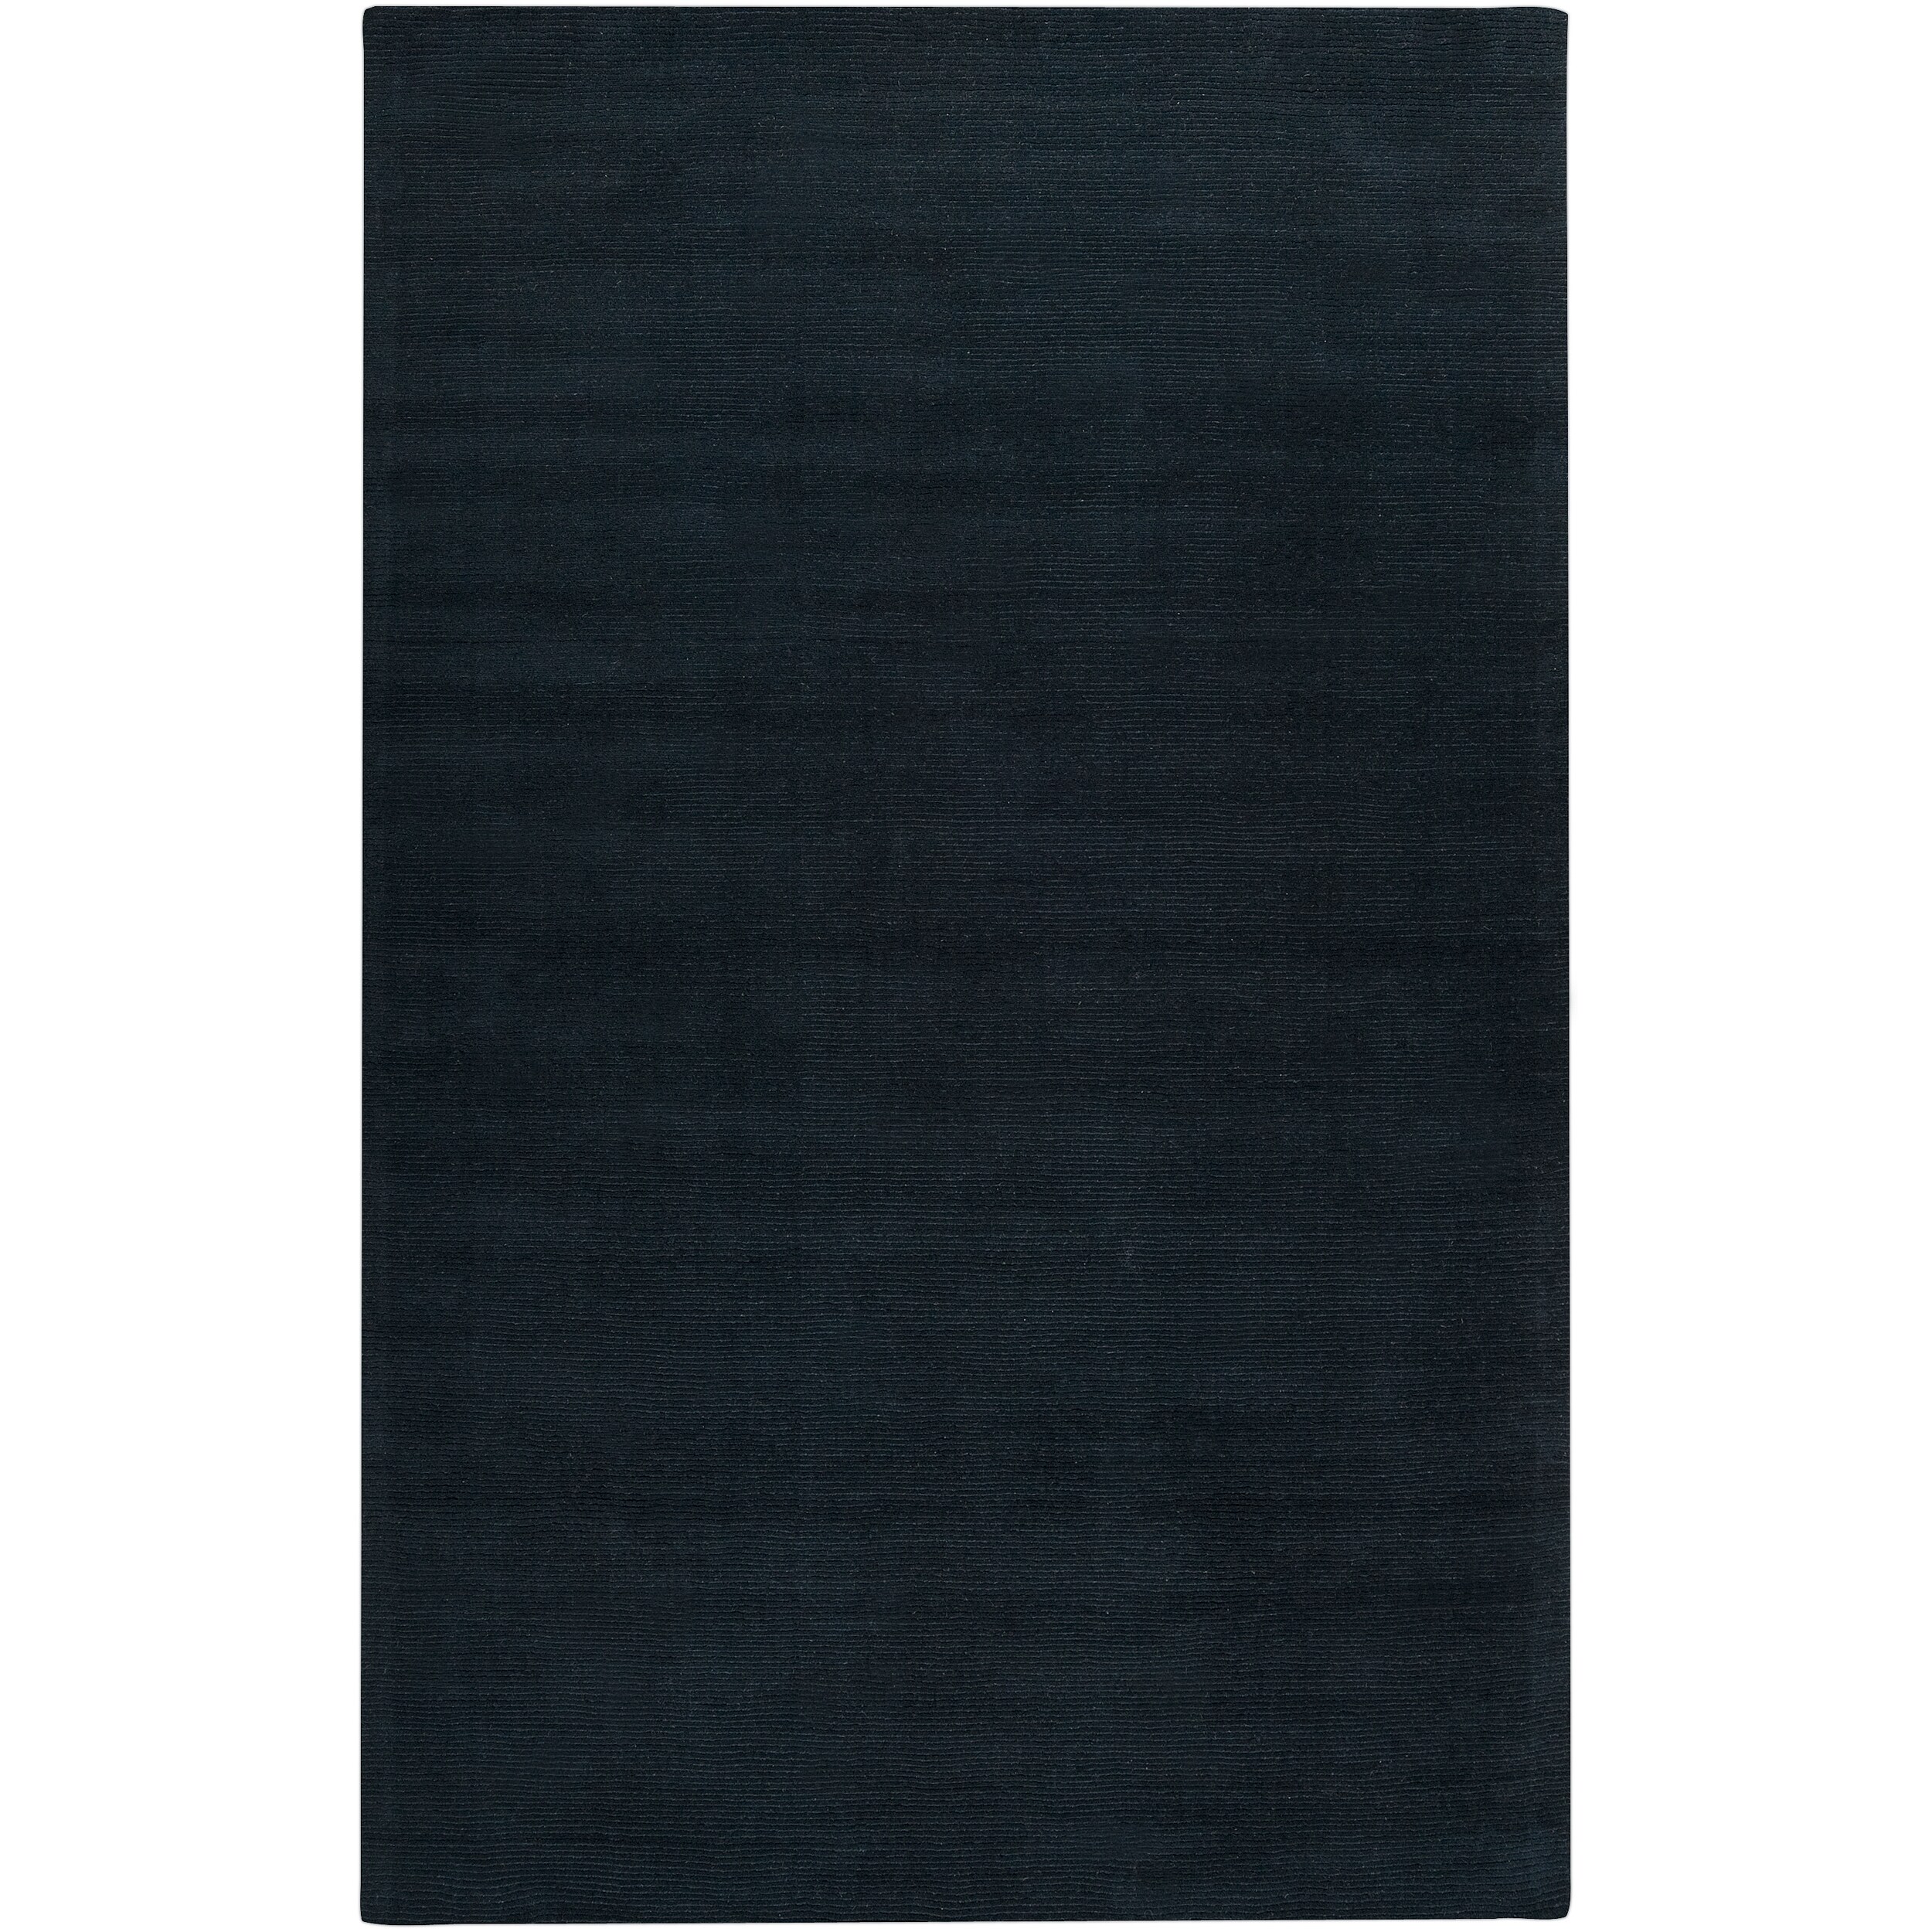 Hand crafted Navy Blue Solid Causal Gunnison Wool Rug (2 x 3